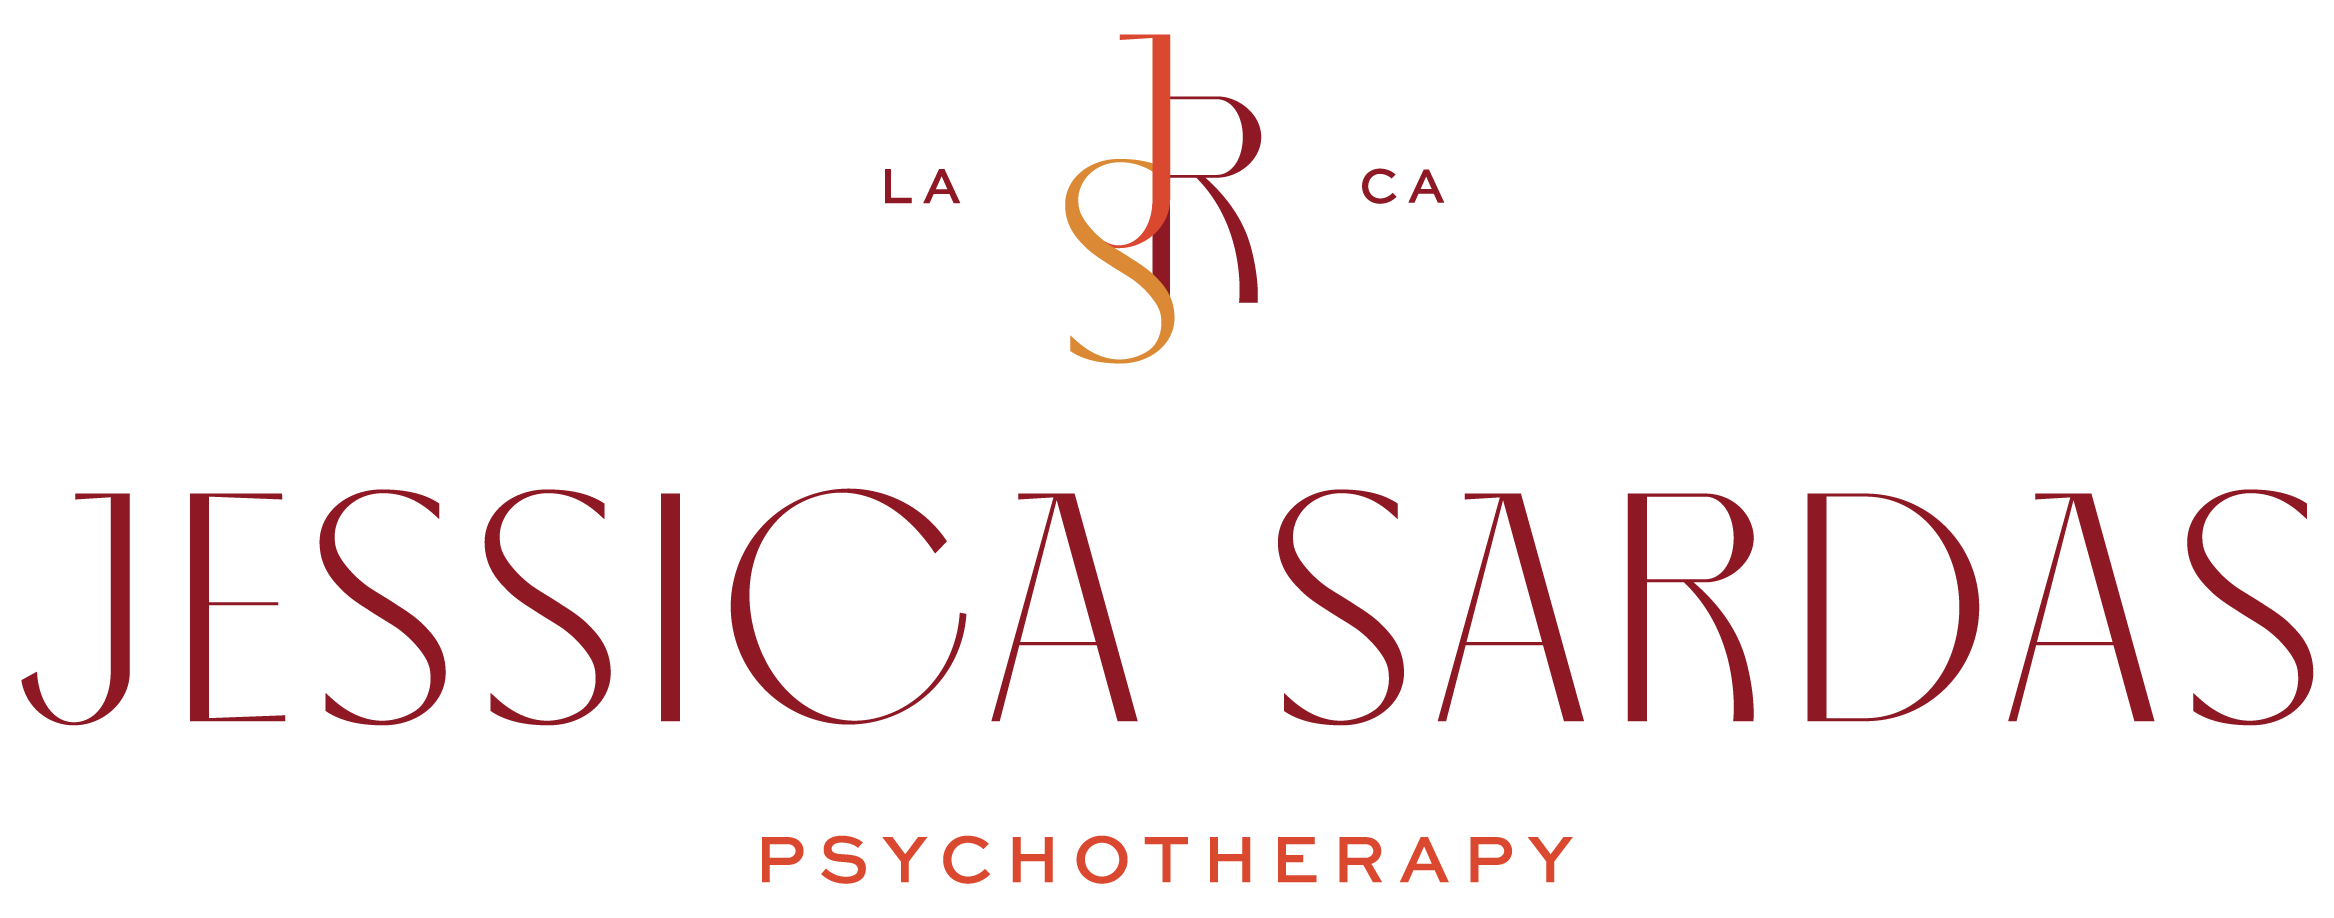 Jessica Sardas Psychotherapy | Therapy for Individuals &amp; Relationships in Los Angeles